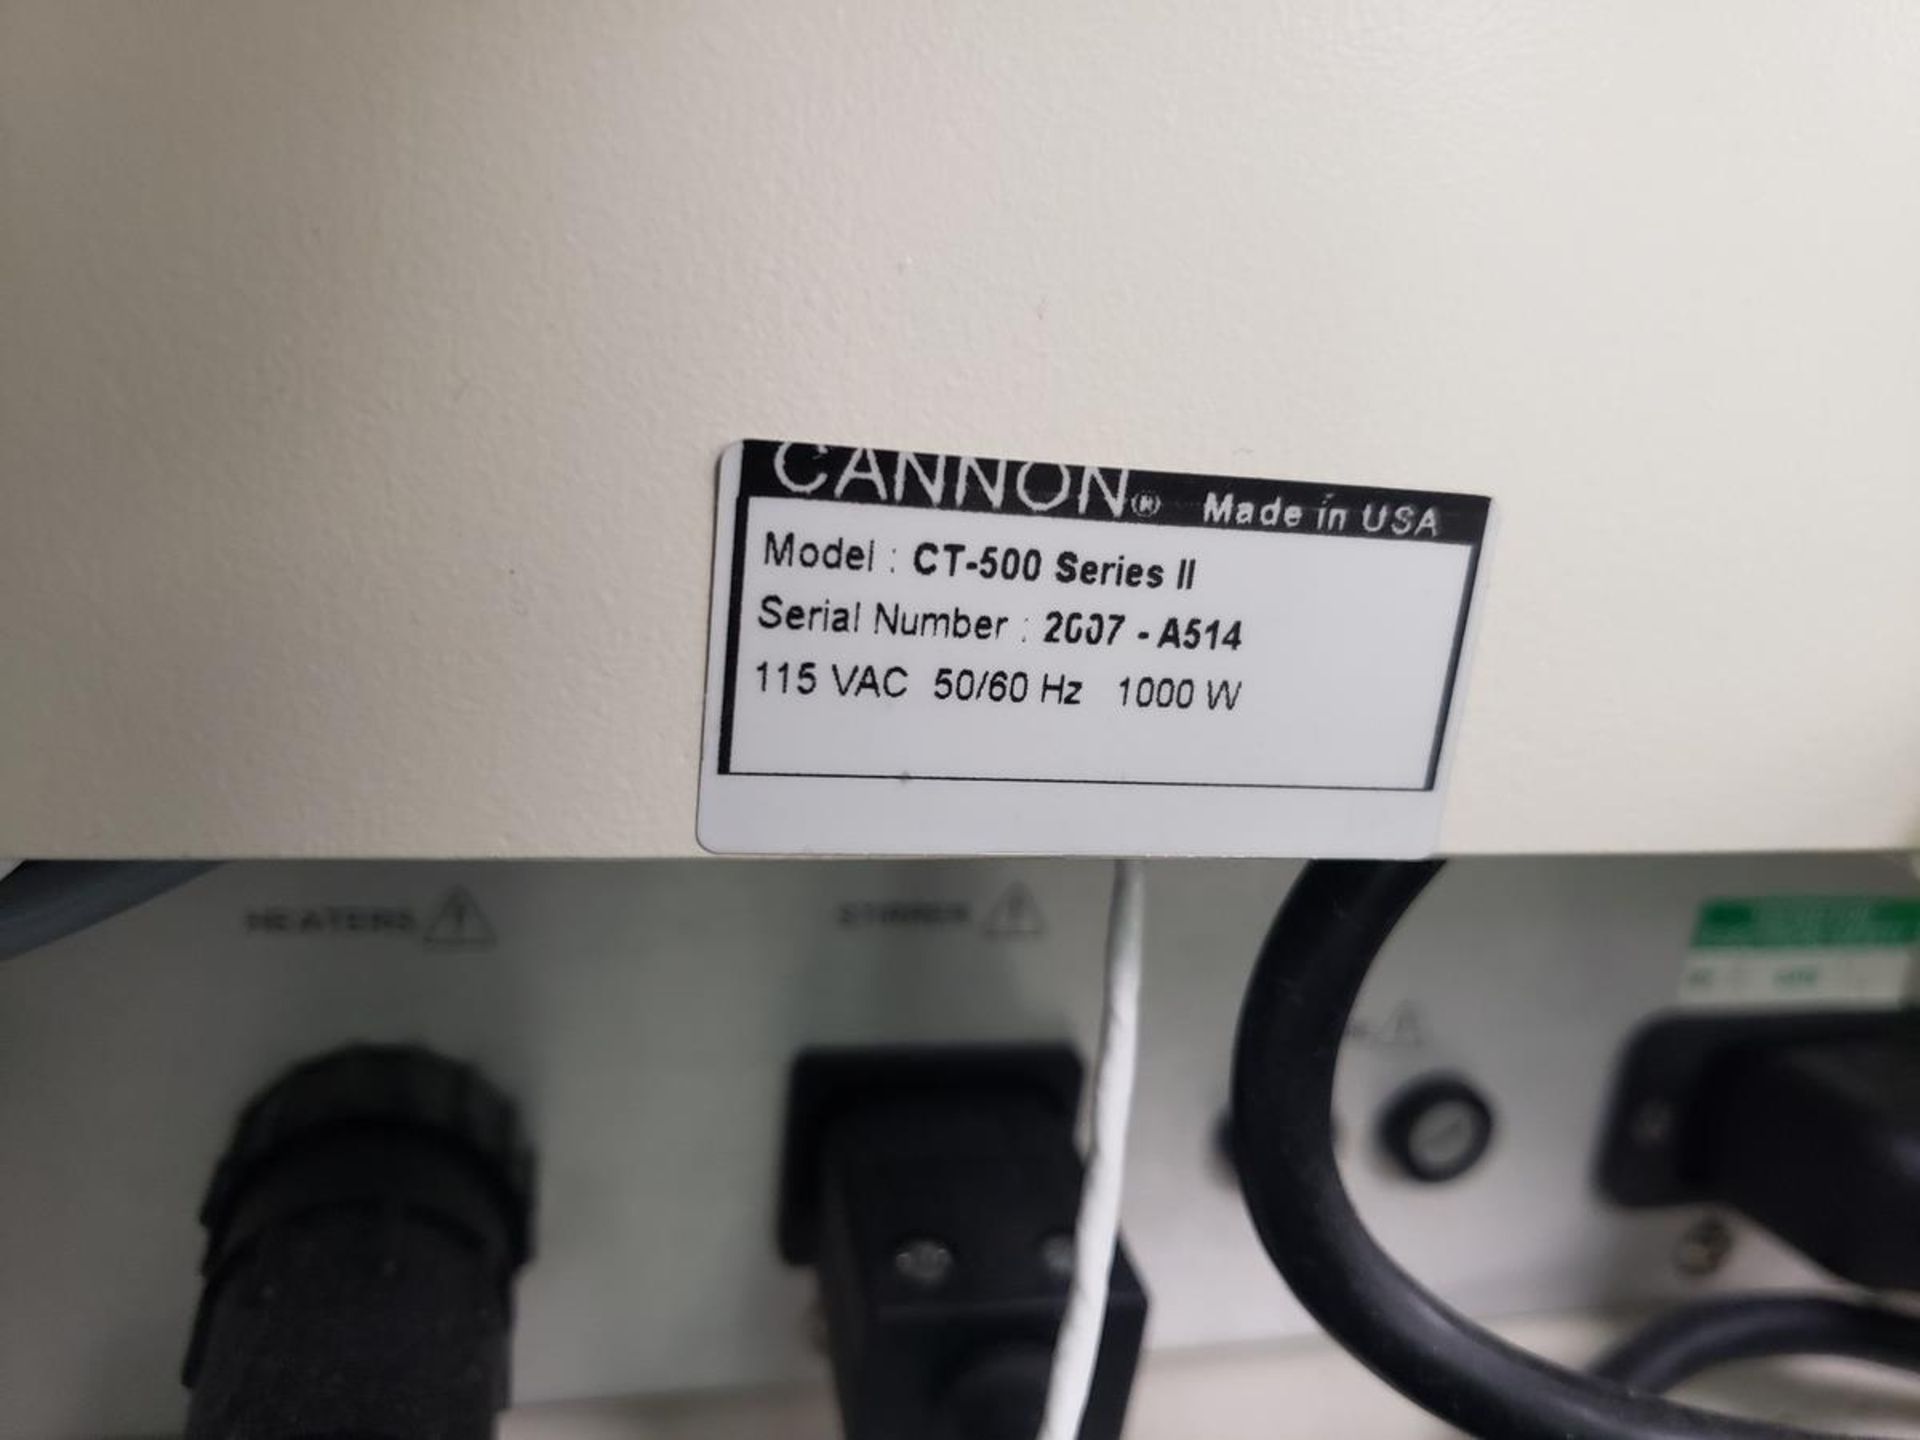 Cannon Constant Temperature Bath, M# CT-500 Series II, S/N 2007-A514 - Image 2 of 3